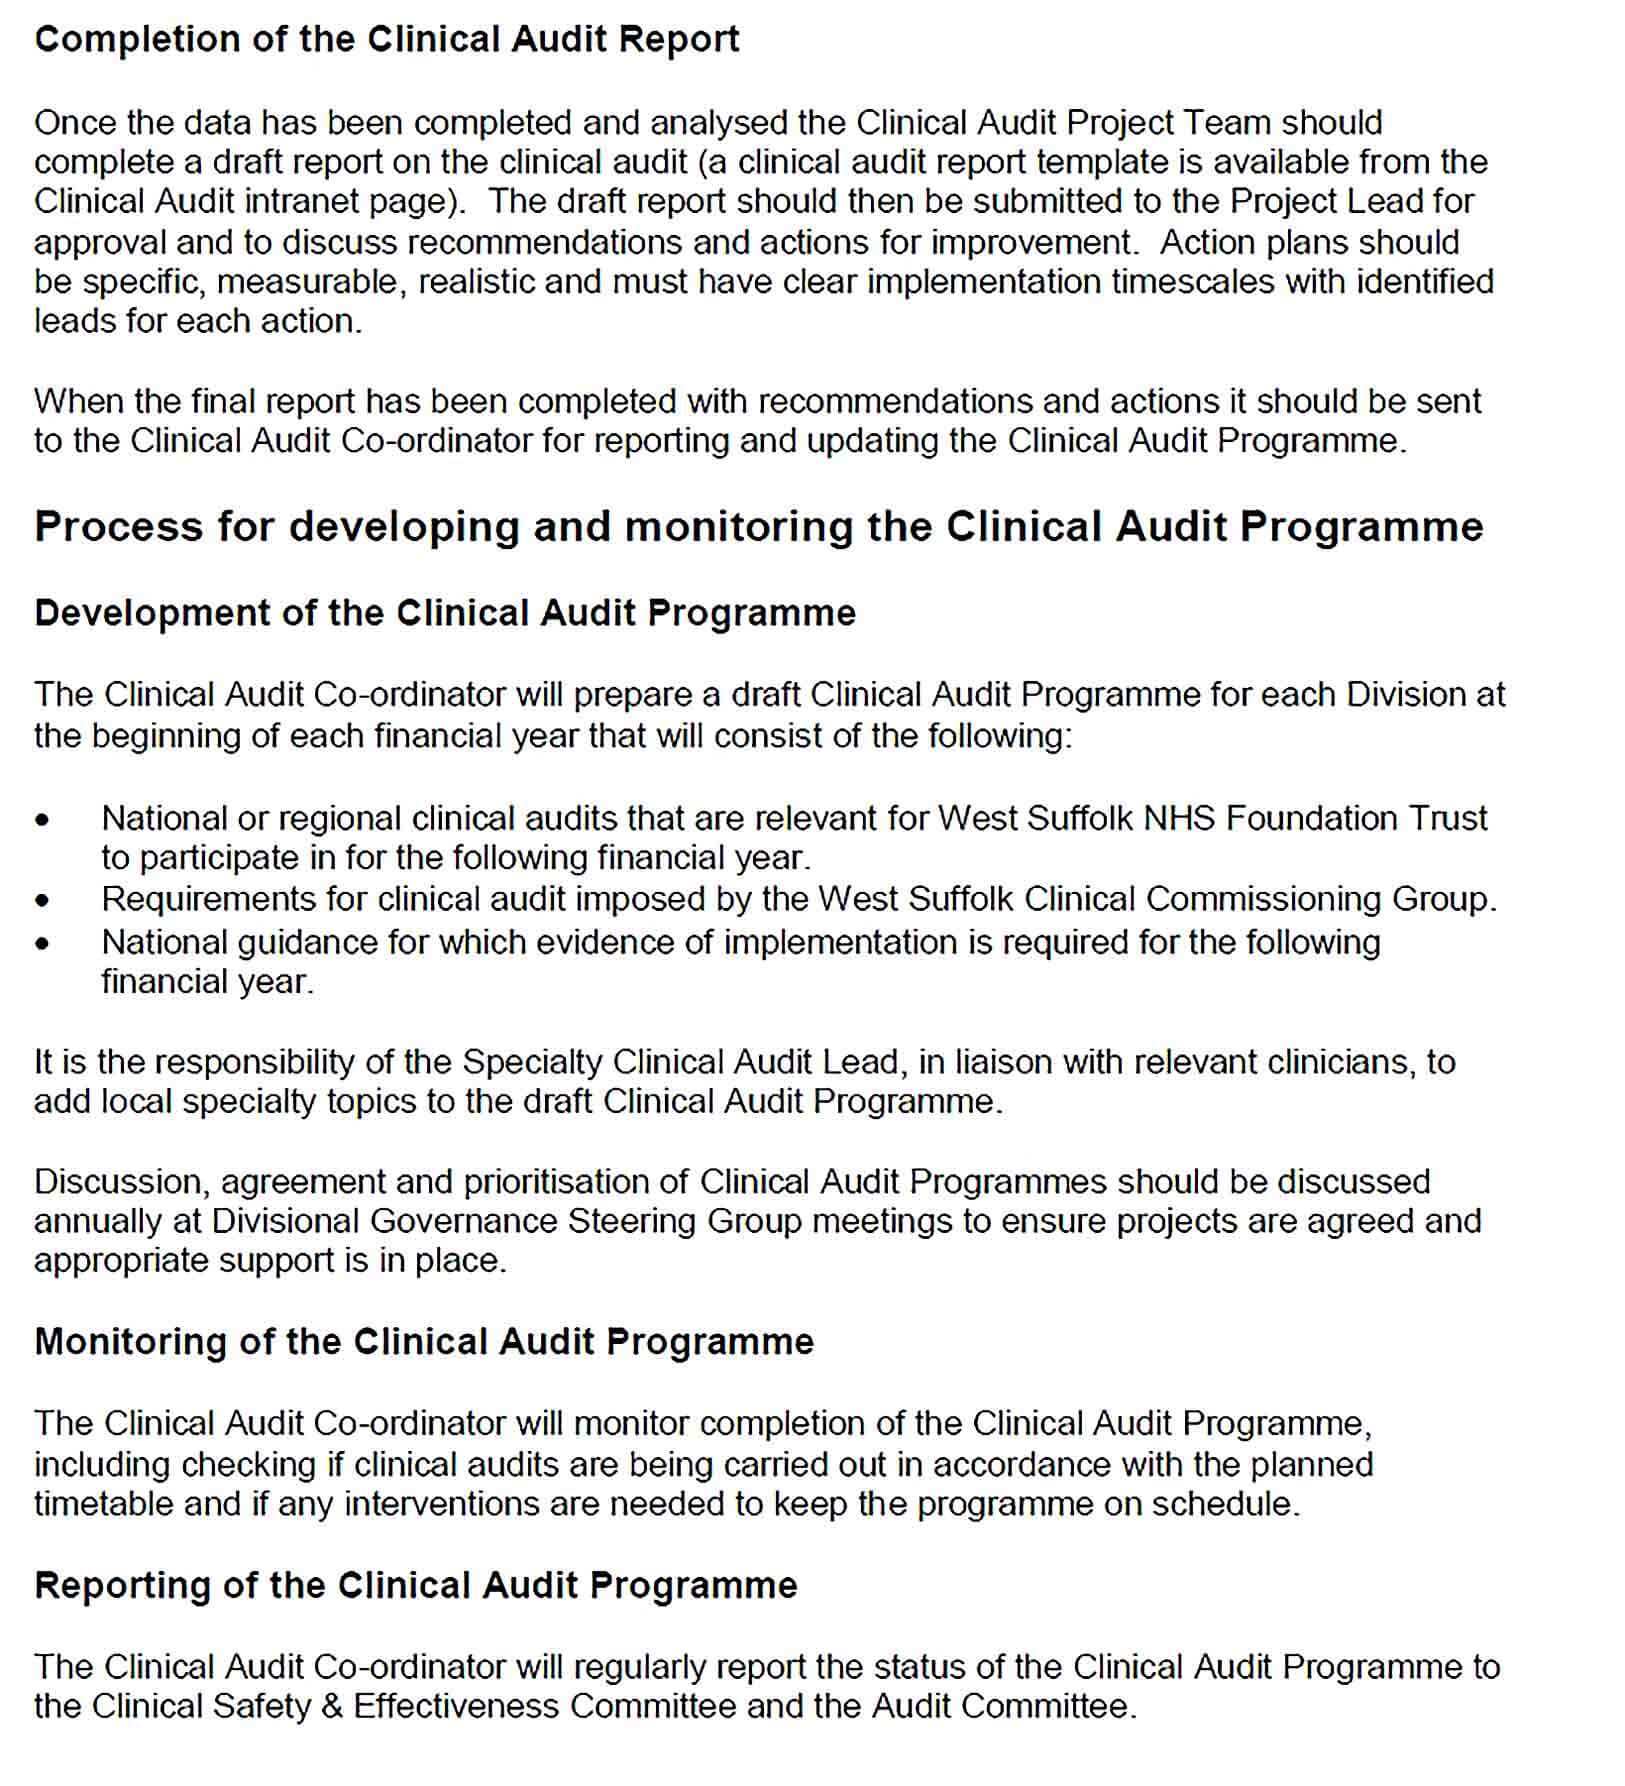 Sample Orthotic Department Clinical Audit Report Template